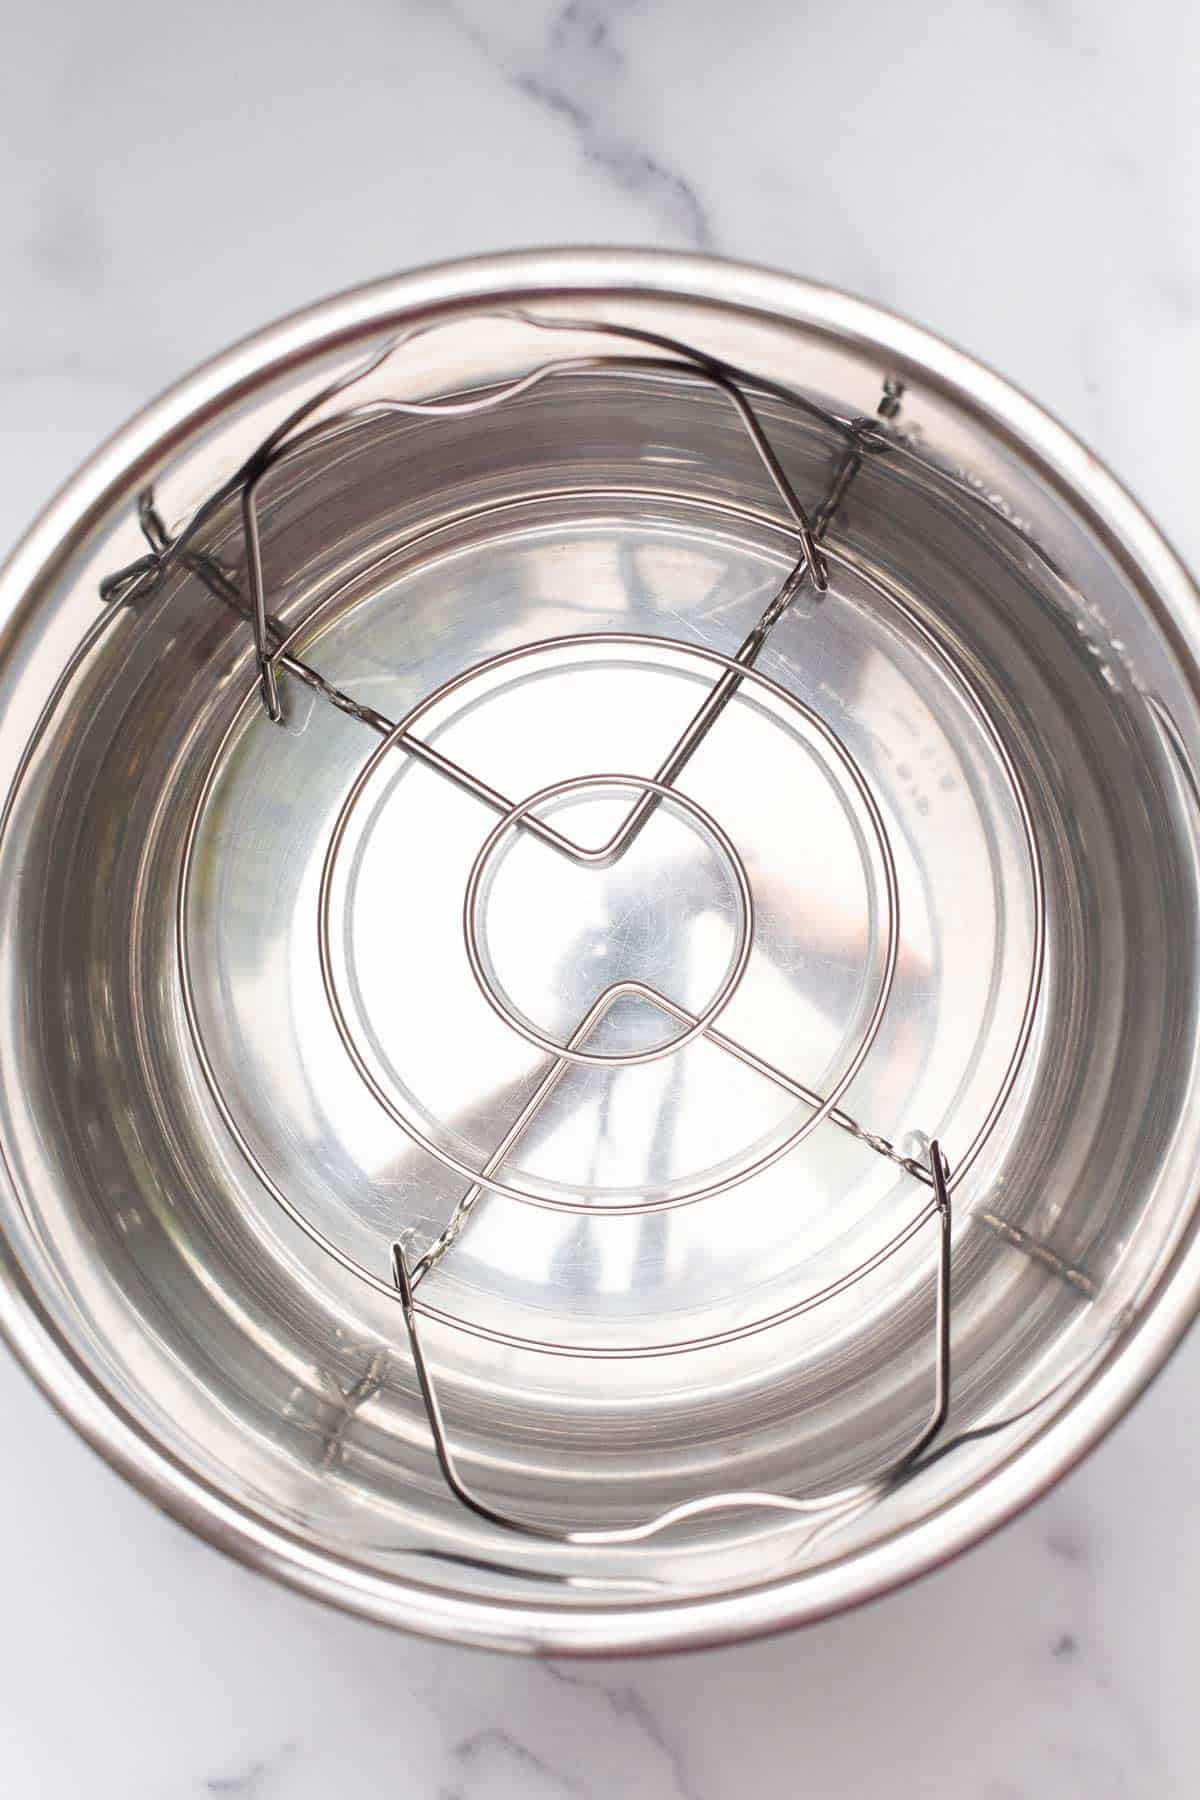 An Instant Pot liner with a trivet placed at the bottom.